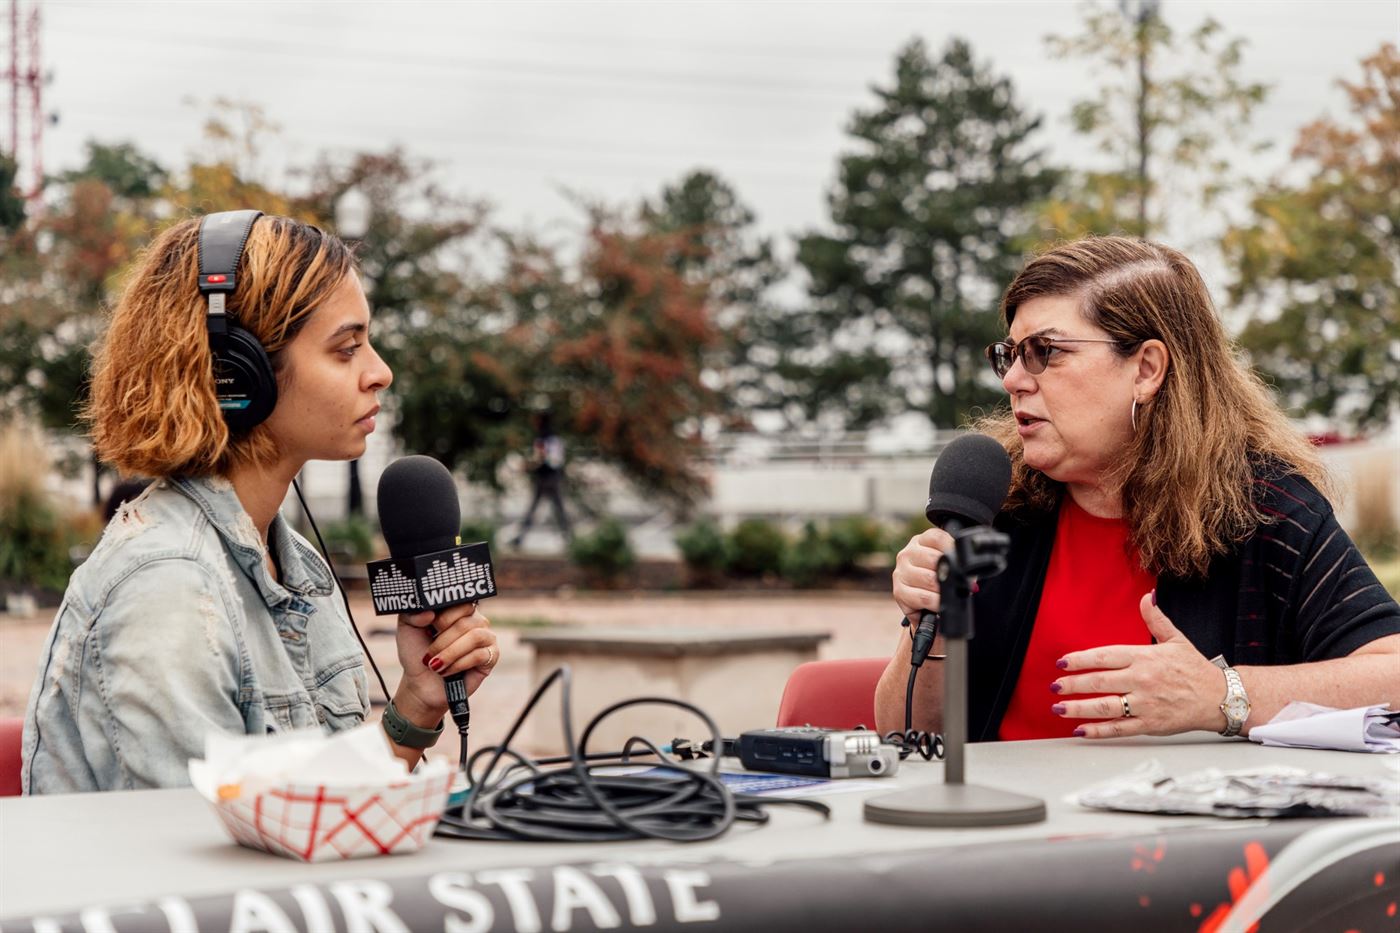 News director of WMSC, Anandaji Cruz Rosario (left), interviewing Dr. Katia Paz Goldfarb (right) about the block party. Photo courtesy of Karsten Englander